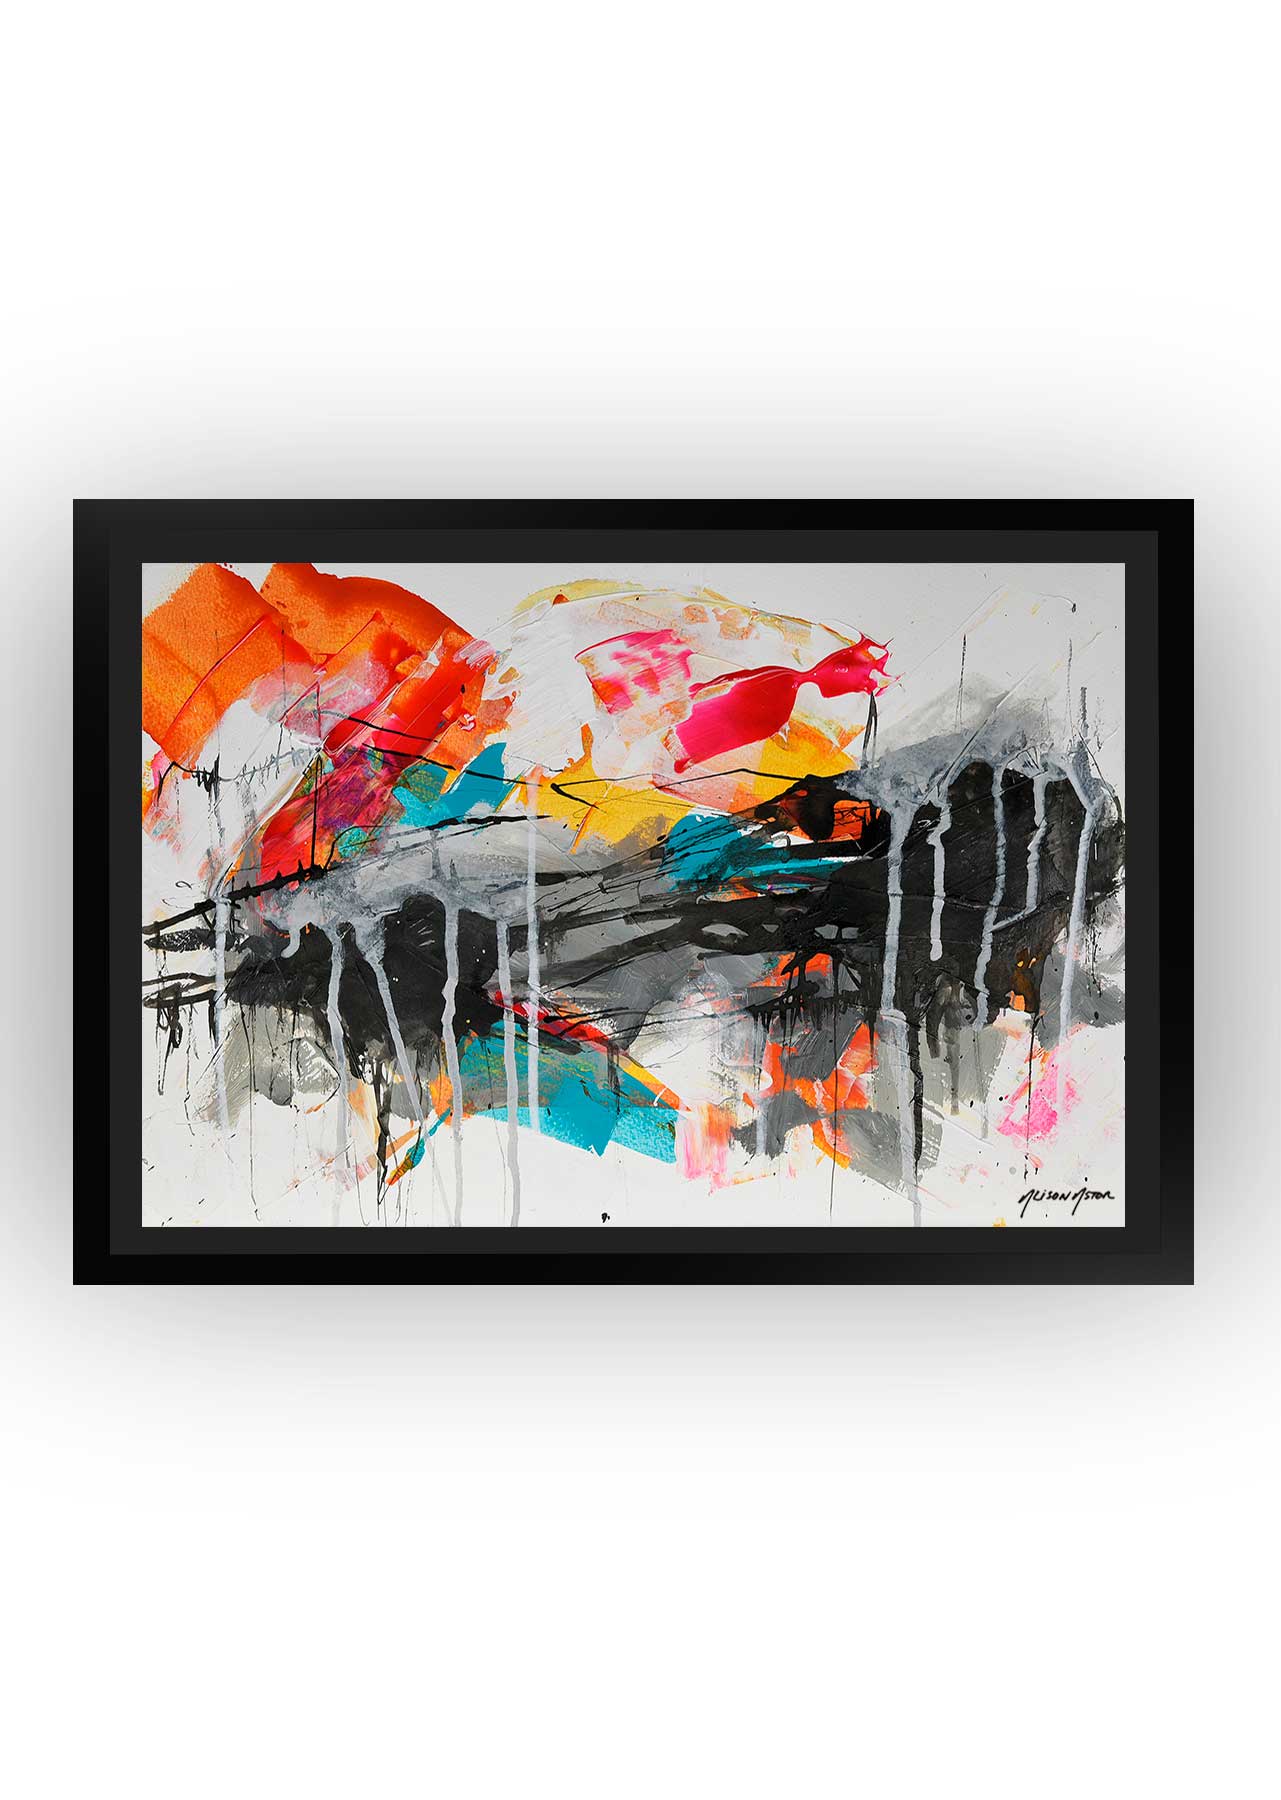 'Bright Day' Original Abstract Painting, Alison Astor